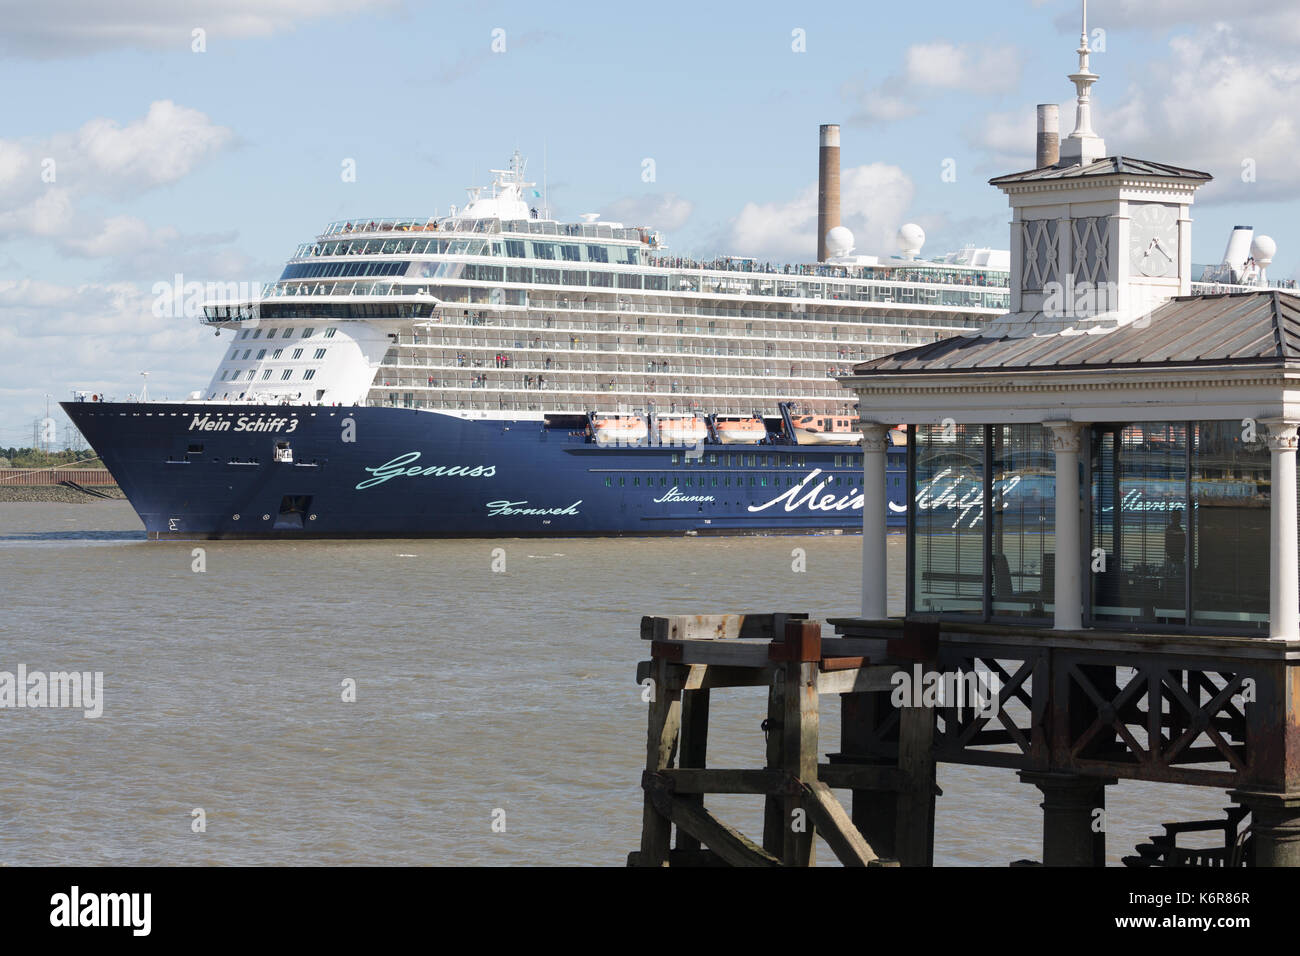 Gravesend, Kent, UK. 13th Sep, 2017. The biggest cruise ship to ever visit London International Cruise Terminal at Tilbury, and possibly the Thames, has departed the river. 293 metre long Mein Schiff 3 dwarfed Gravesend as she passed by. The ship's departure was delayed twice because of Storm Aileen. Credit: Rob Powell/Alamy Live News Stock Photo